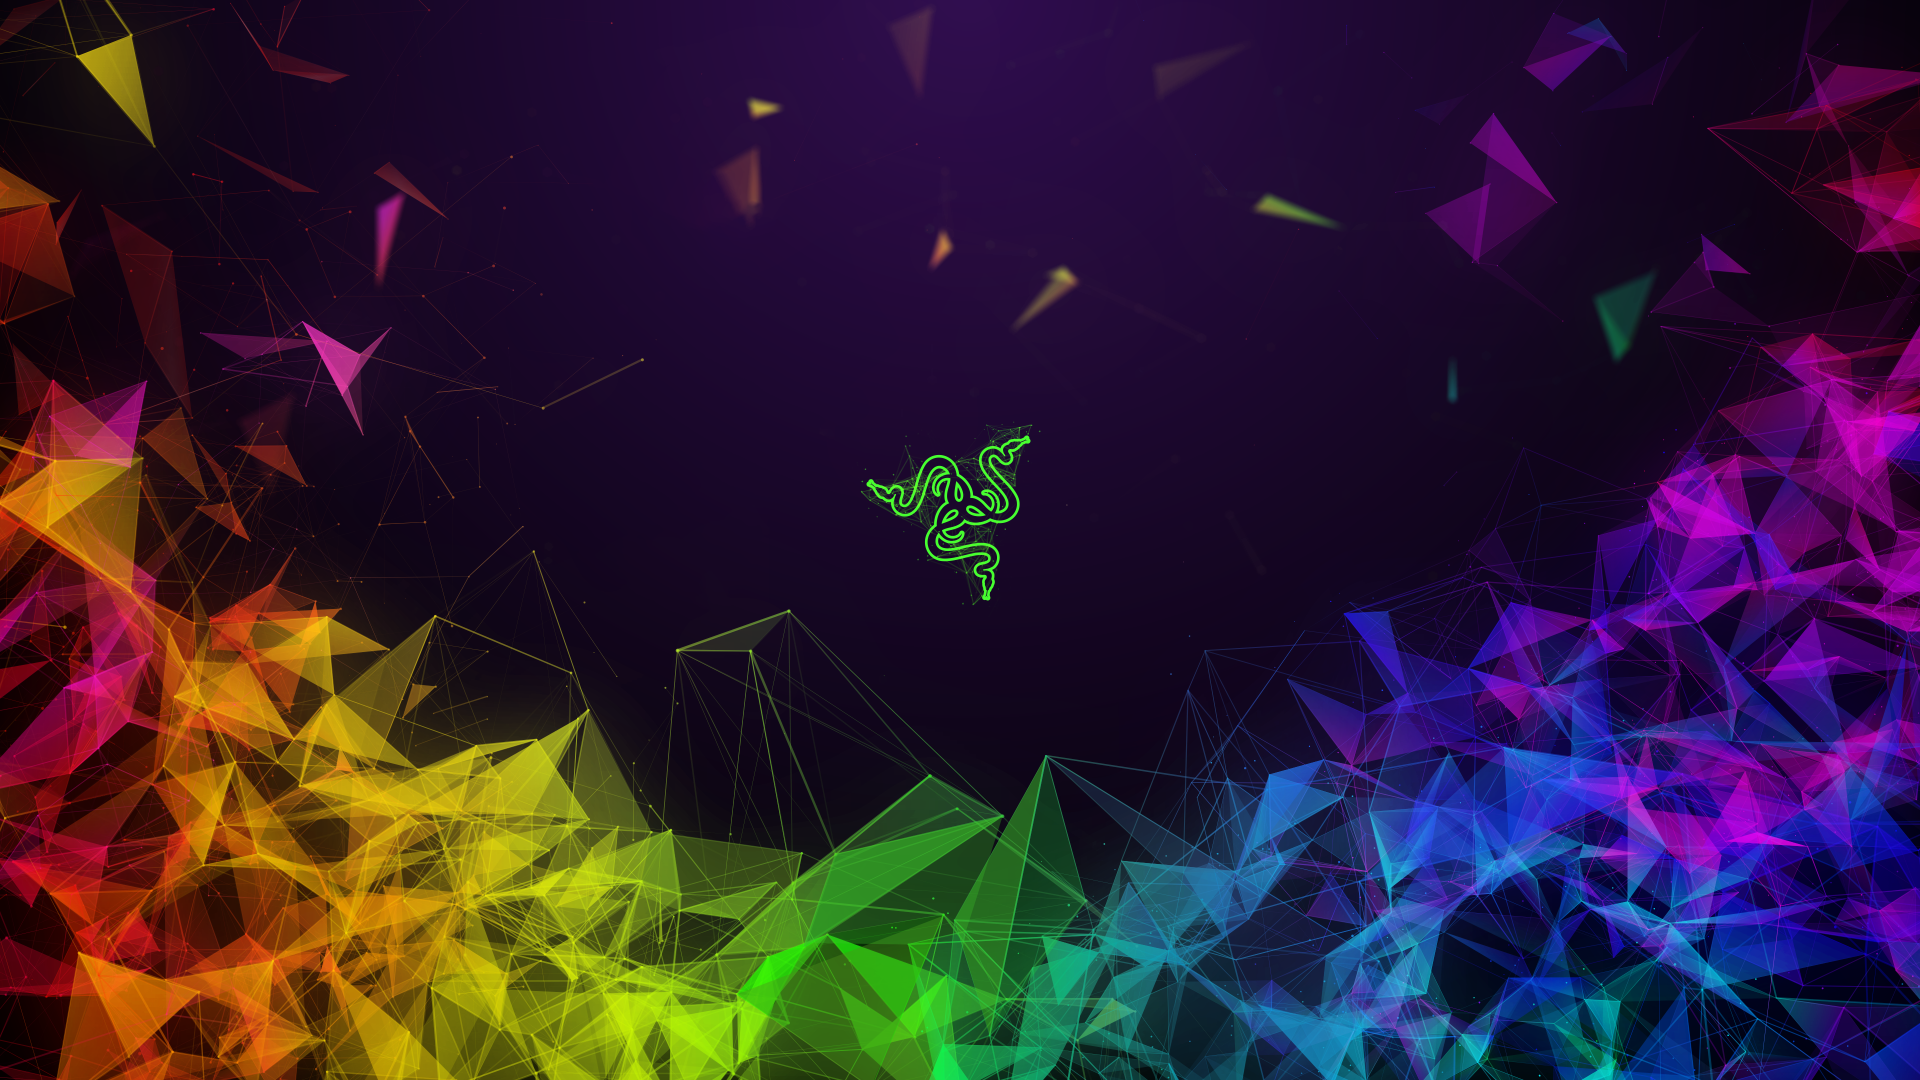 Wallpaper Razer Blade Gaming Laptop, Abstract, Colorful, Vibrant, Dark, HD, 4K, Abstract,. Wallpaper for iPhone, Android, Mobile and Desktop